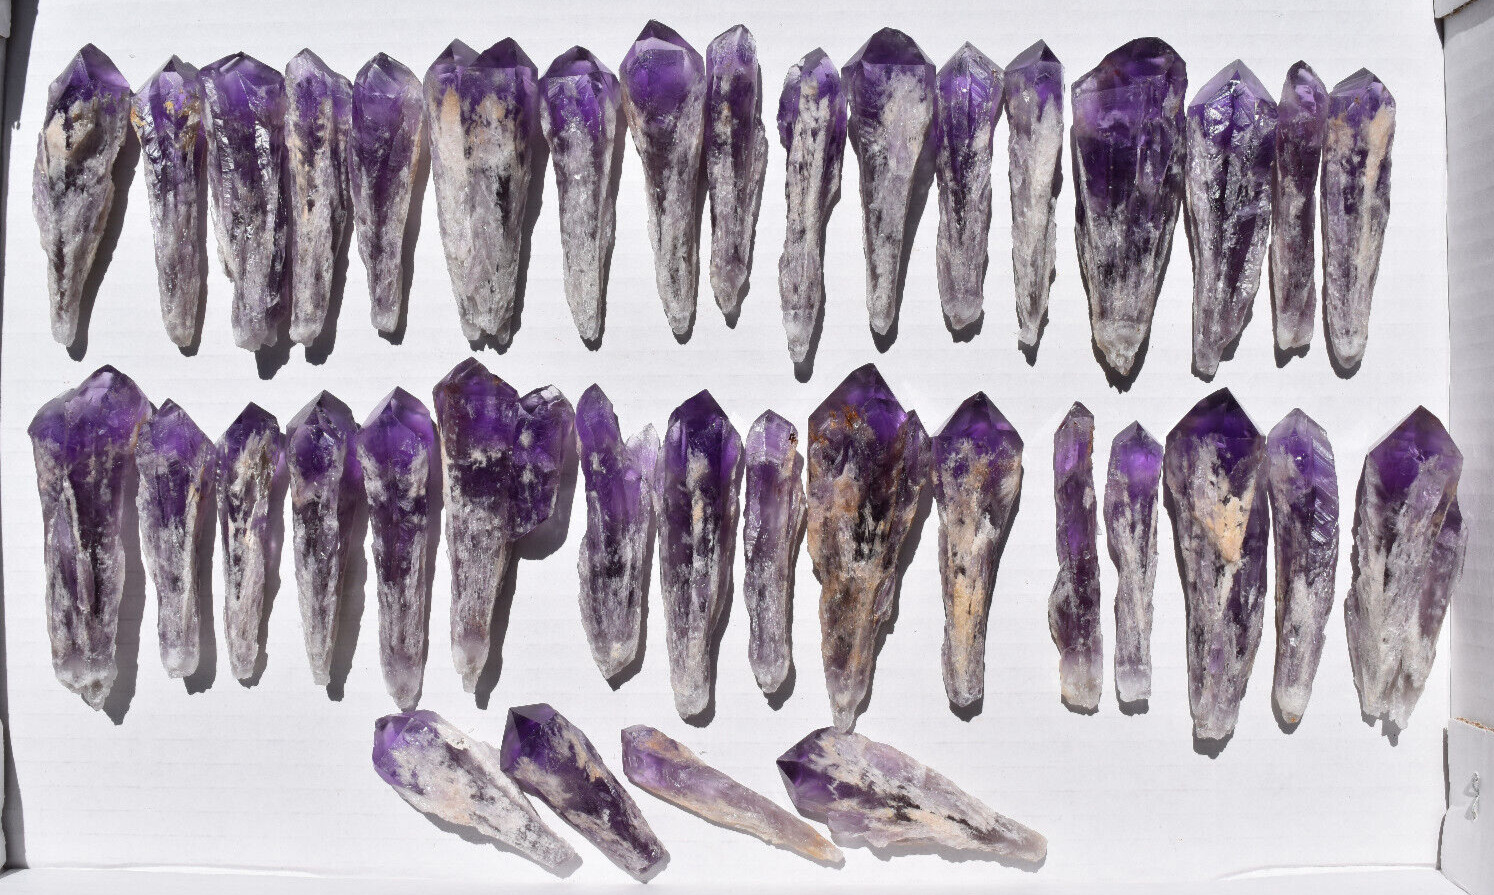 WHOLESALE Laser Amethyst Crystals from Bahia, Brazil 37 pcs 1 kg  # 5371